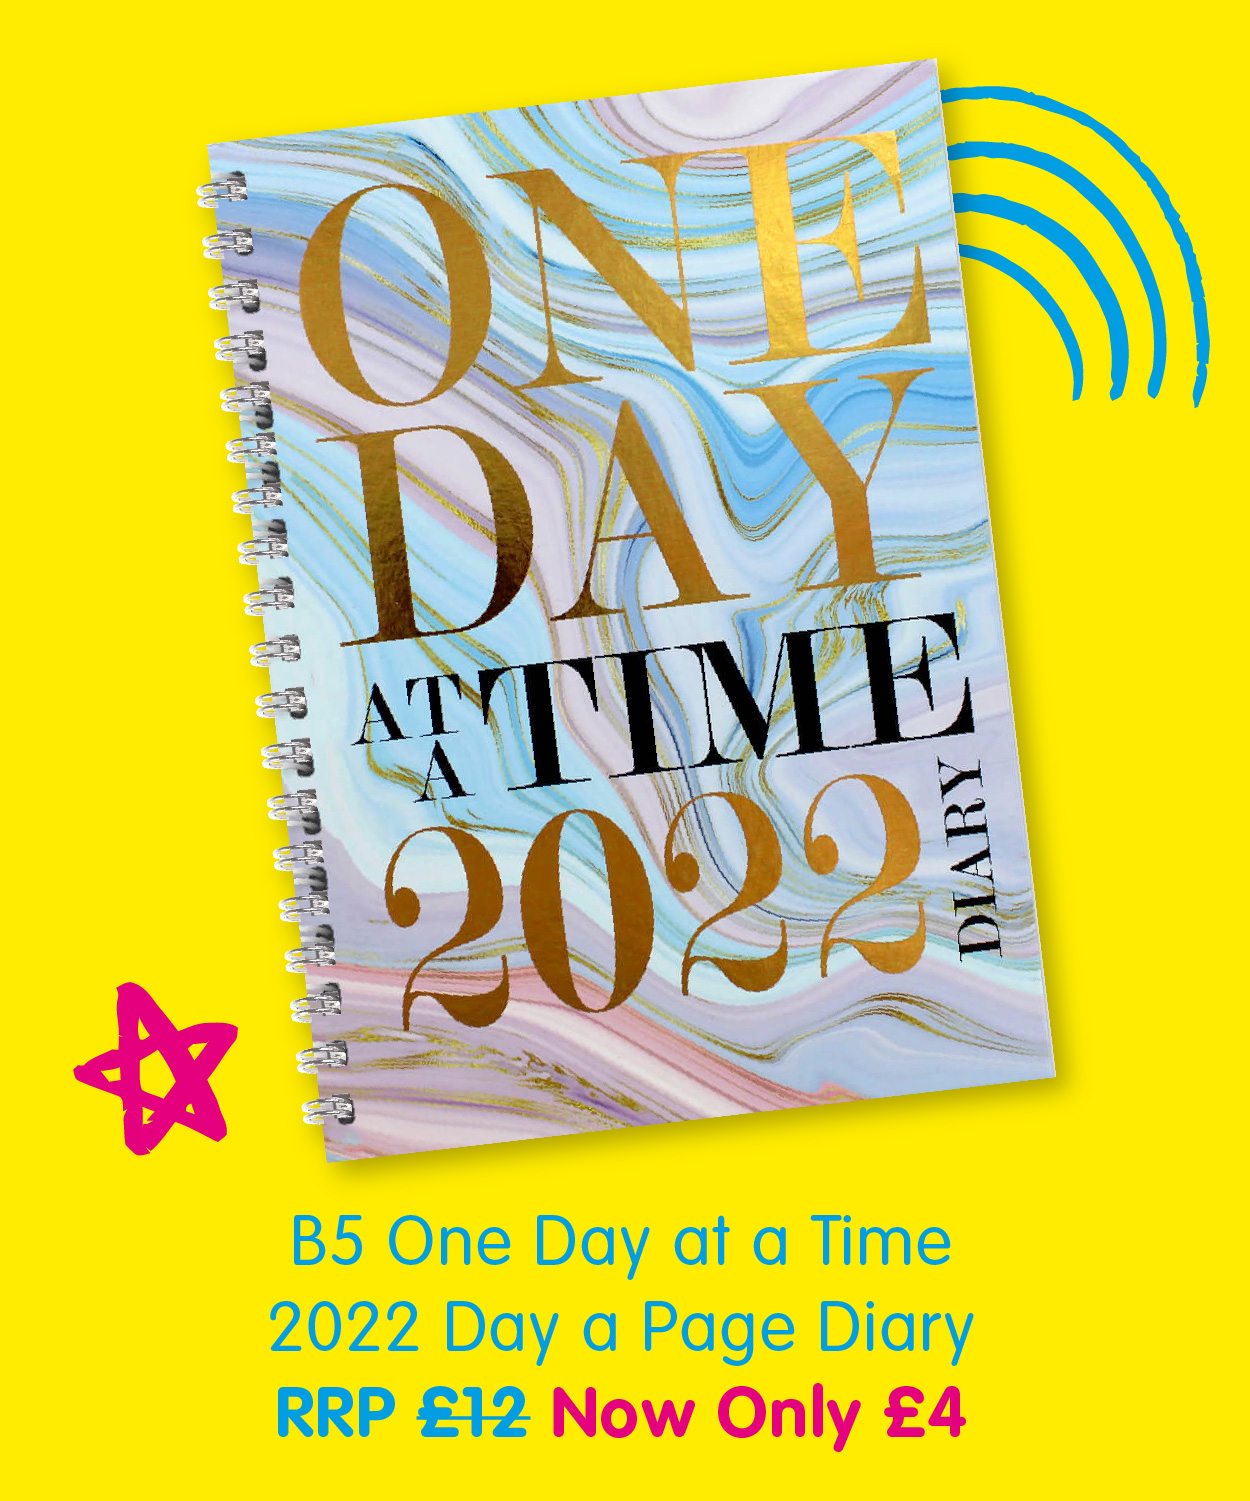 B5 One Day at a Time 2022 Day a Page Diary